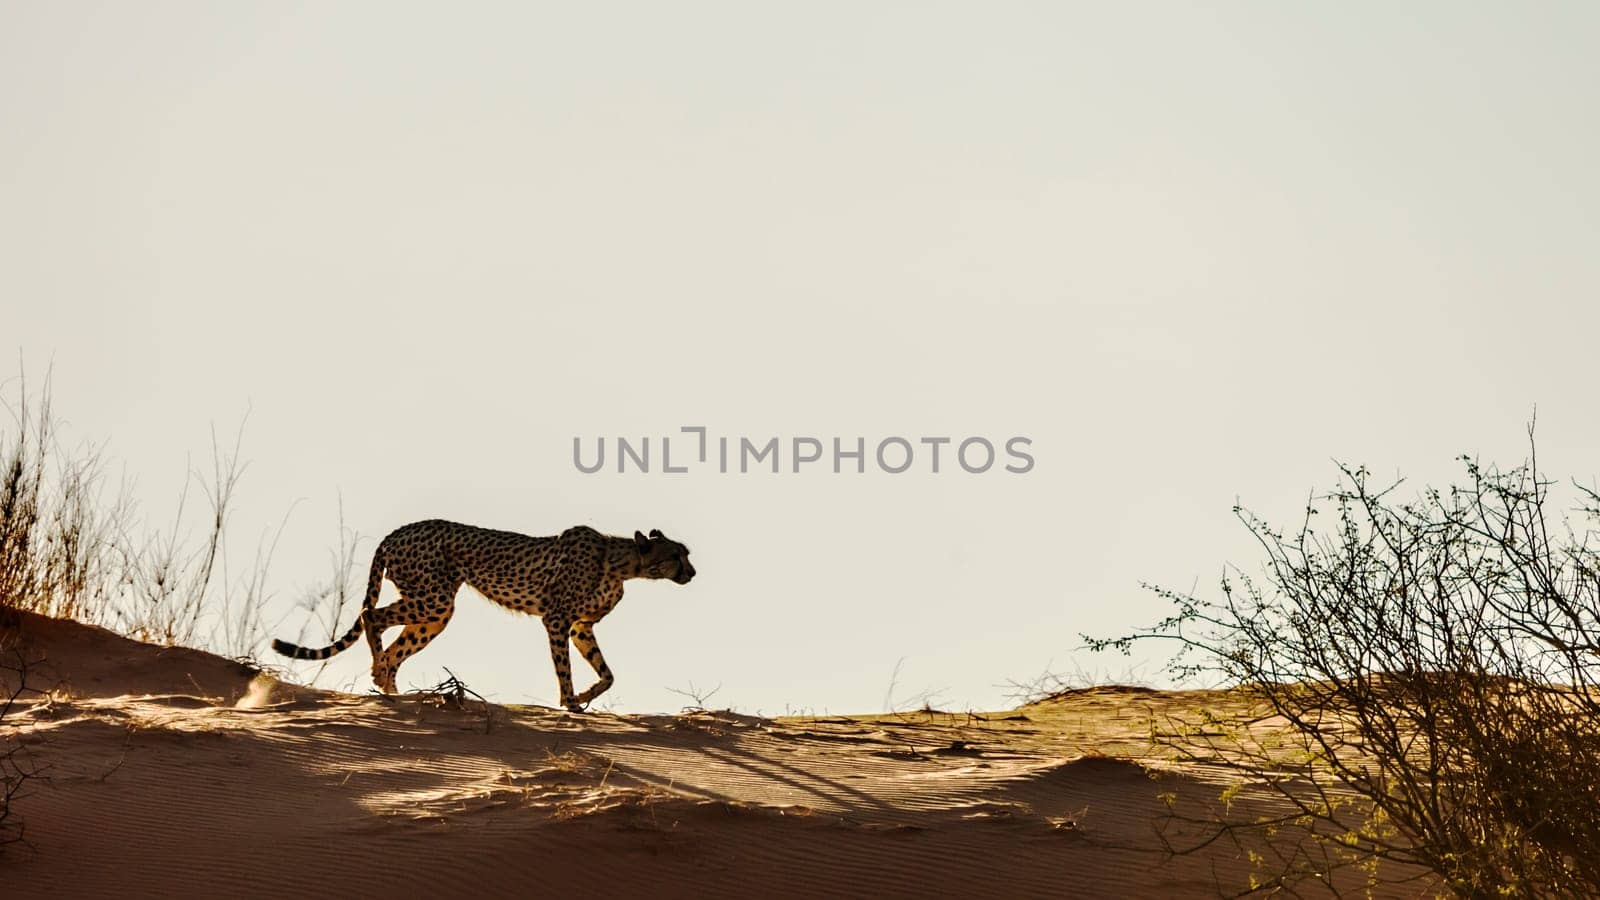 Lion in Kgalagadi transfrontier park, South Africa by PACOCOMO